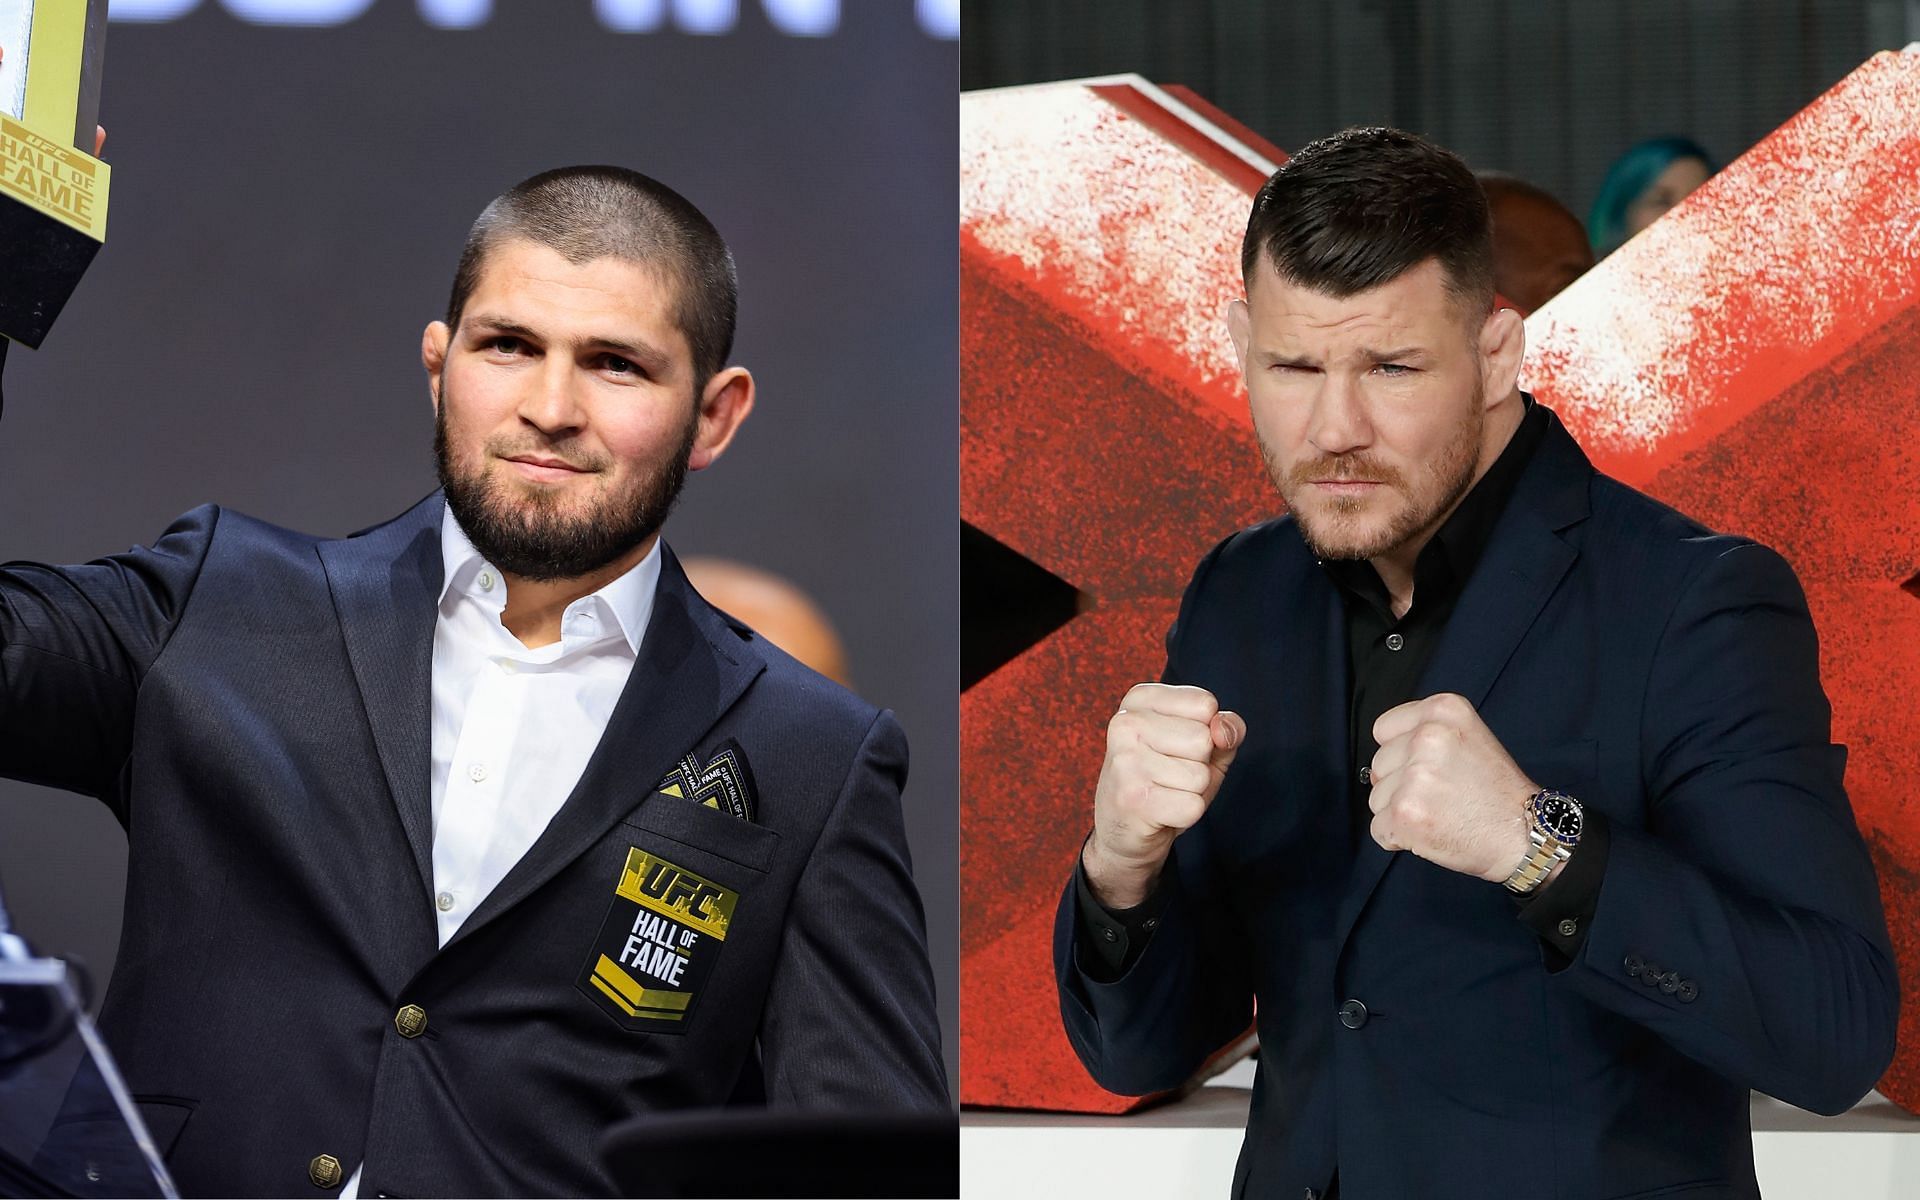 Former UFC lightweight champion Khabib Nurmagomedov (left) and former UFC middleweight champion Michael Bisping (right) are both highly revered MMA veterans [Images courtesy: Getty Images]